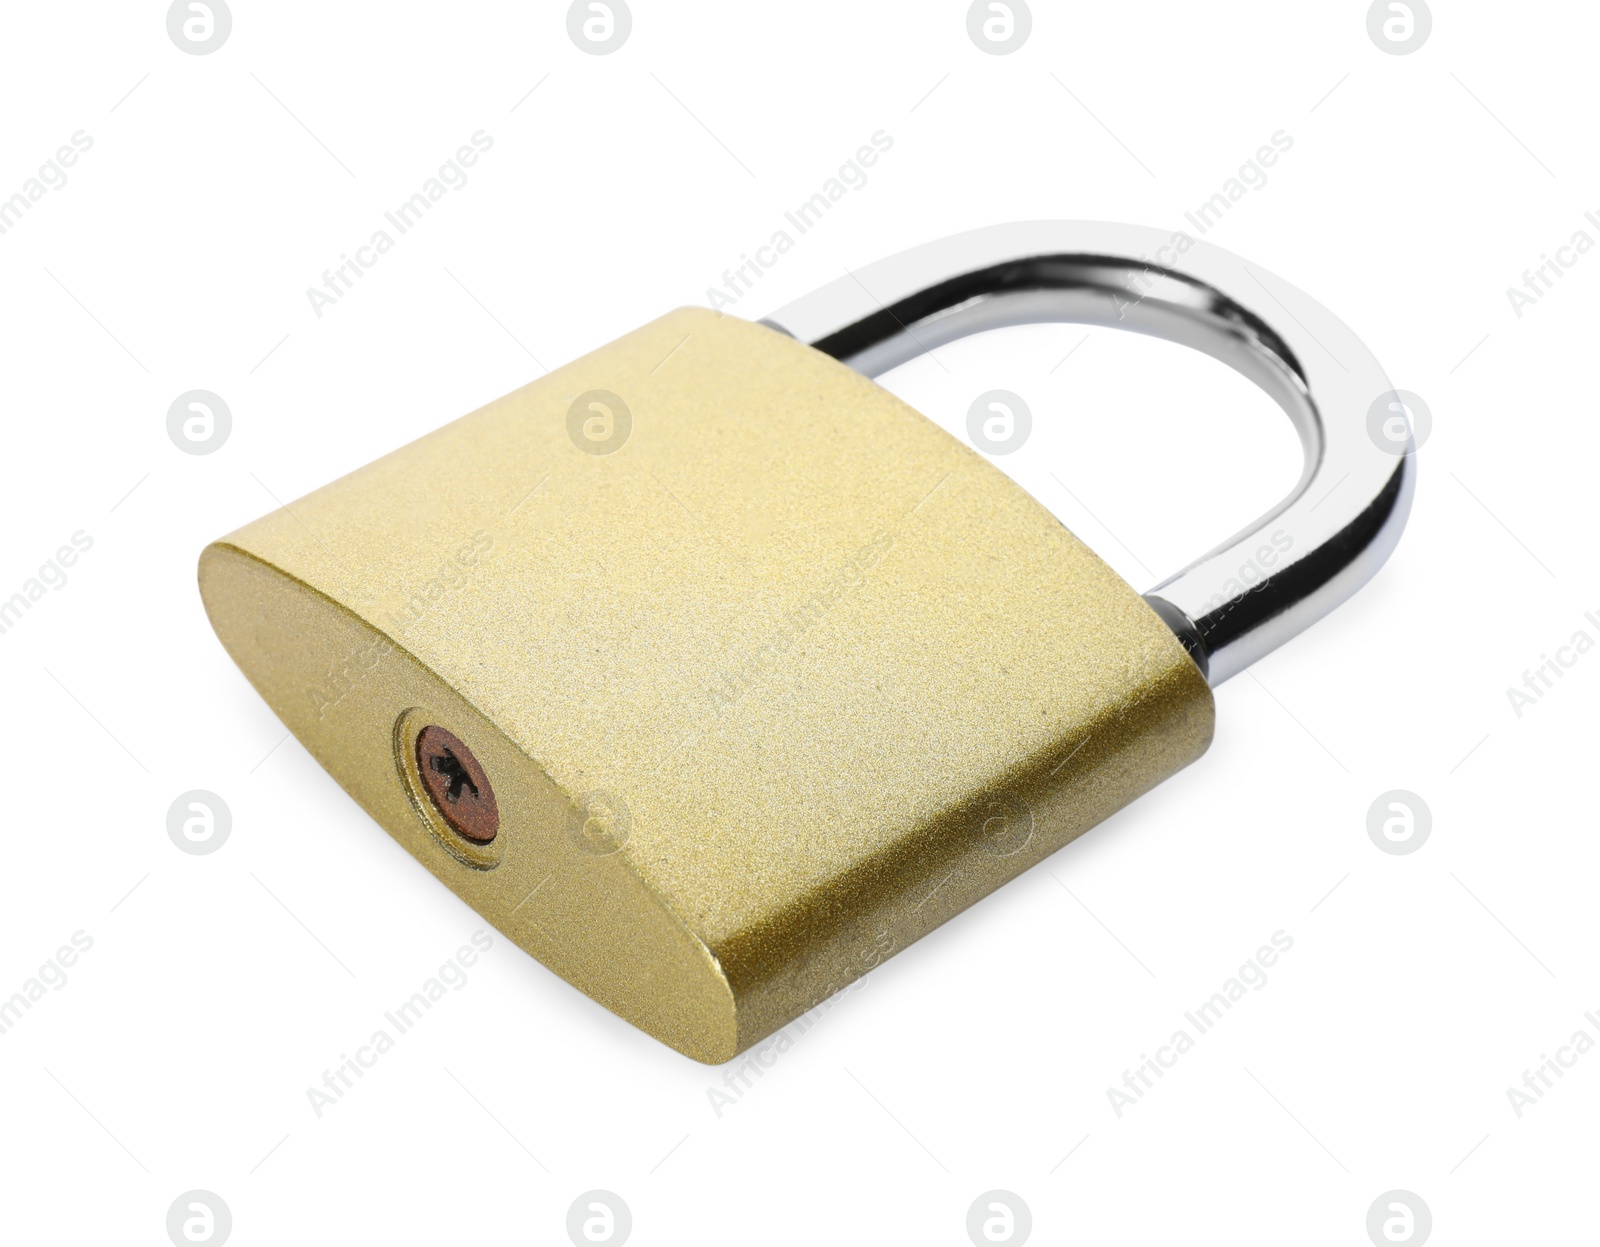 Photo of Steel padlock isolated on white. Safety concept